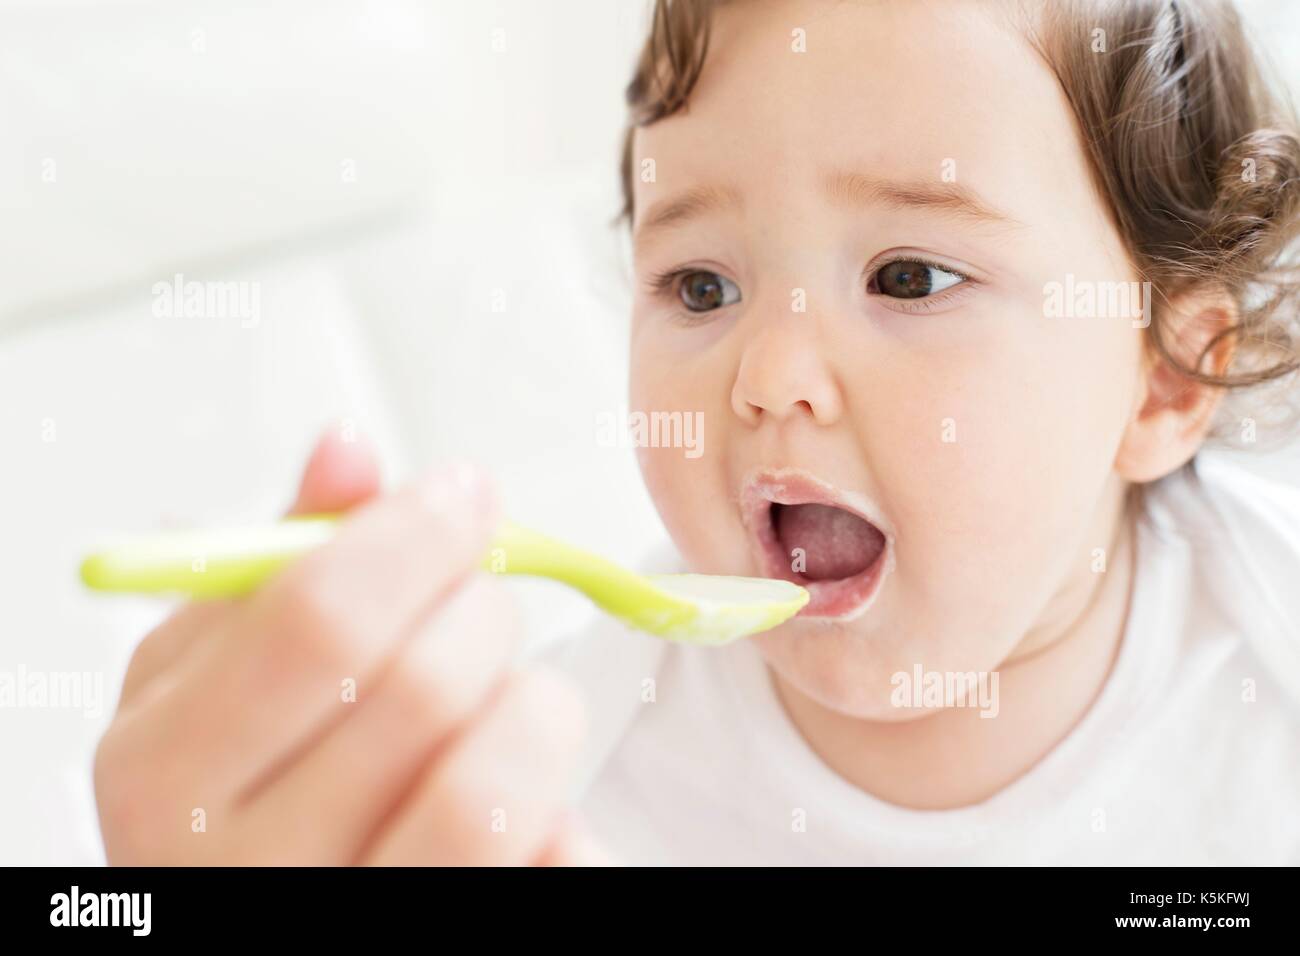 Female toddler being spoon fed. Stock Photo